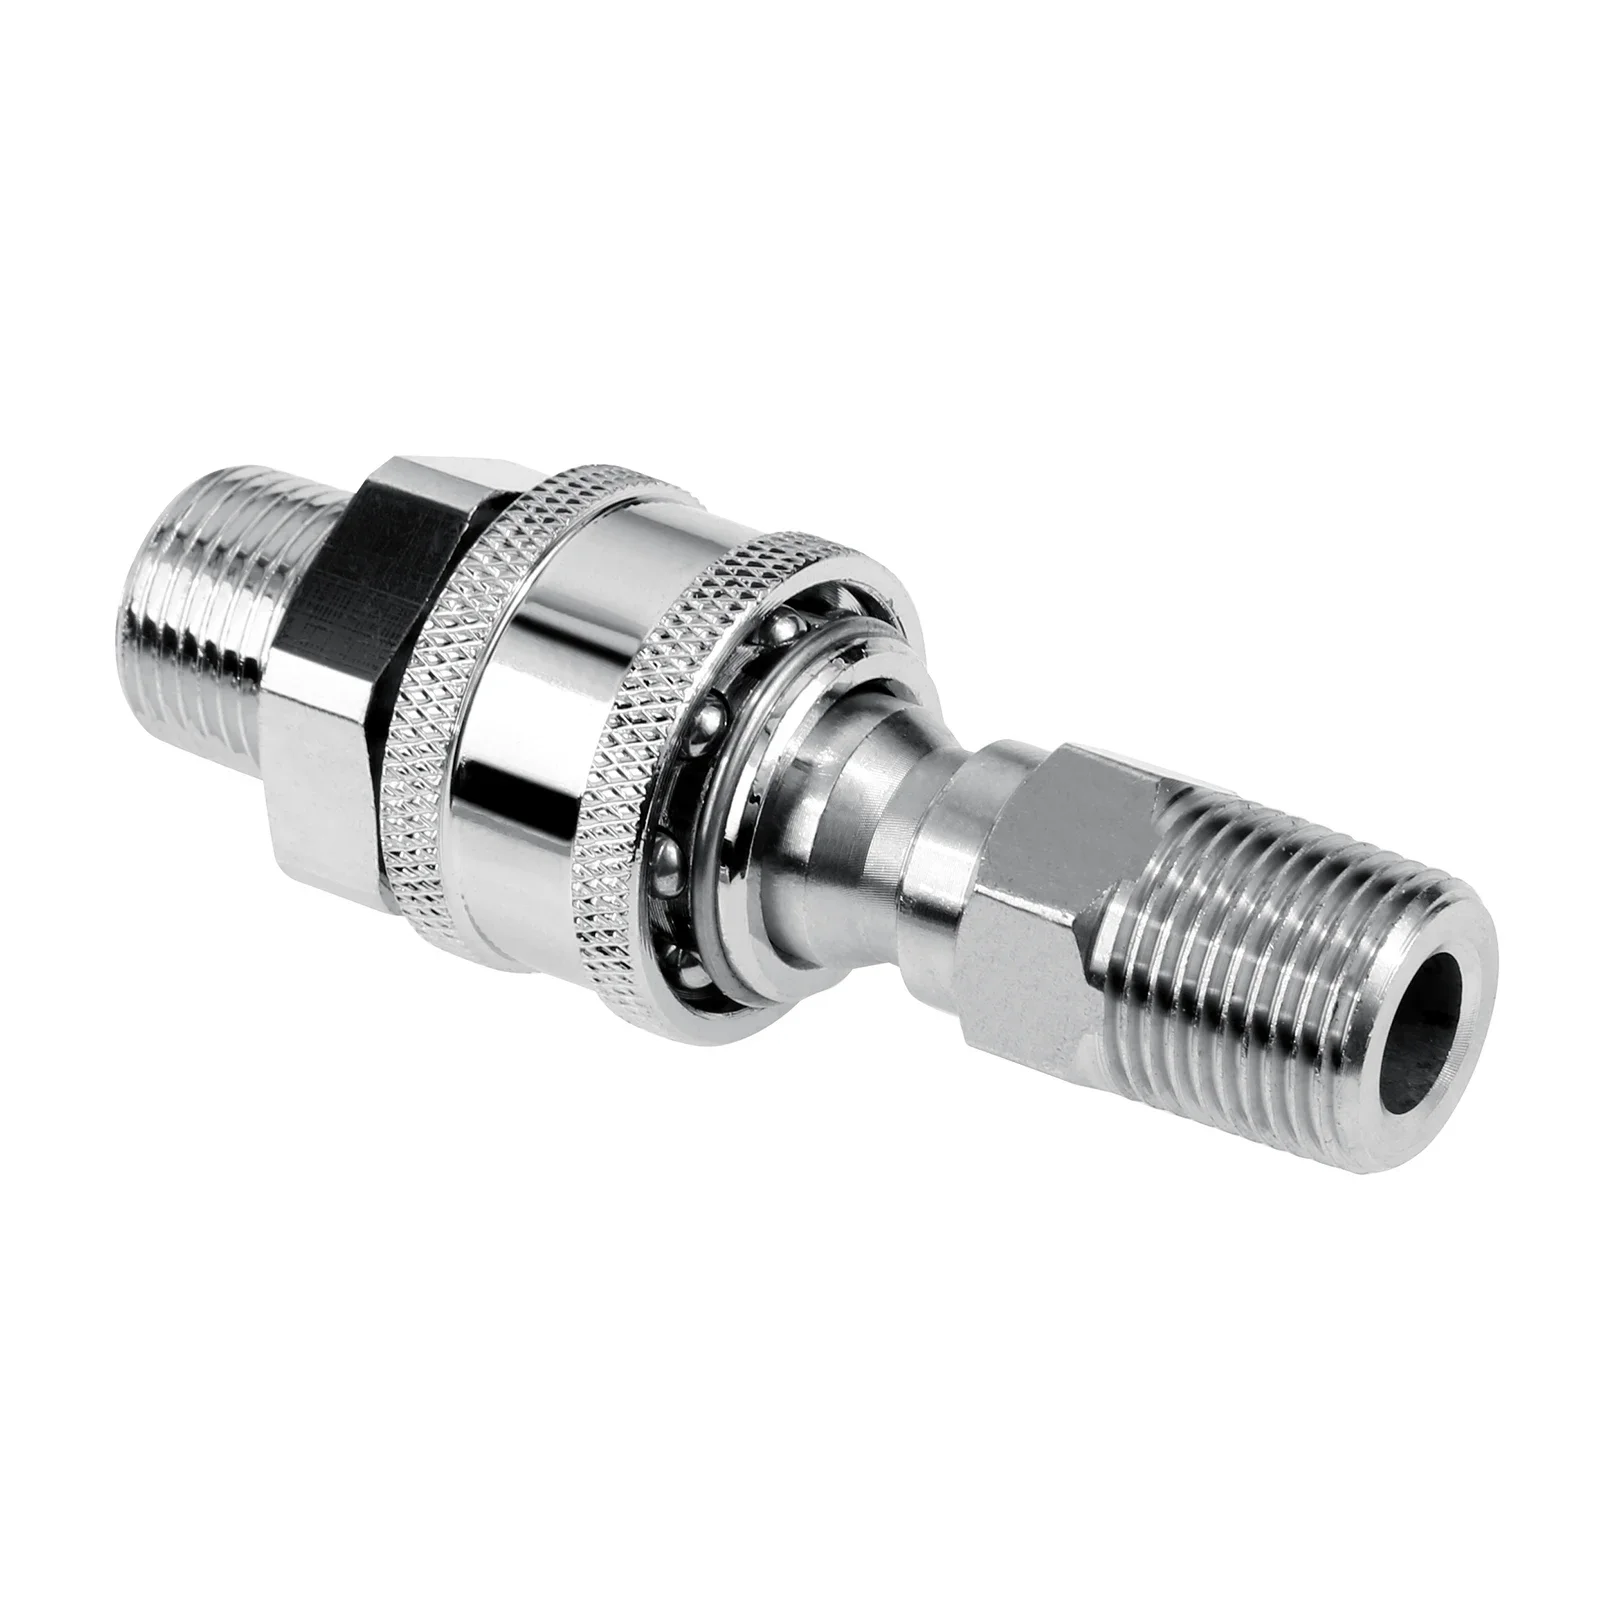 

3/8In Stainless Steel Plug & Socket NPT Quick Connector External Thread Kit High Pressure Washer Adapters Garden Water Fittings